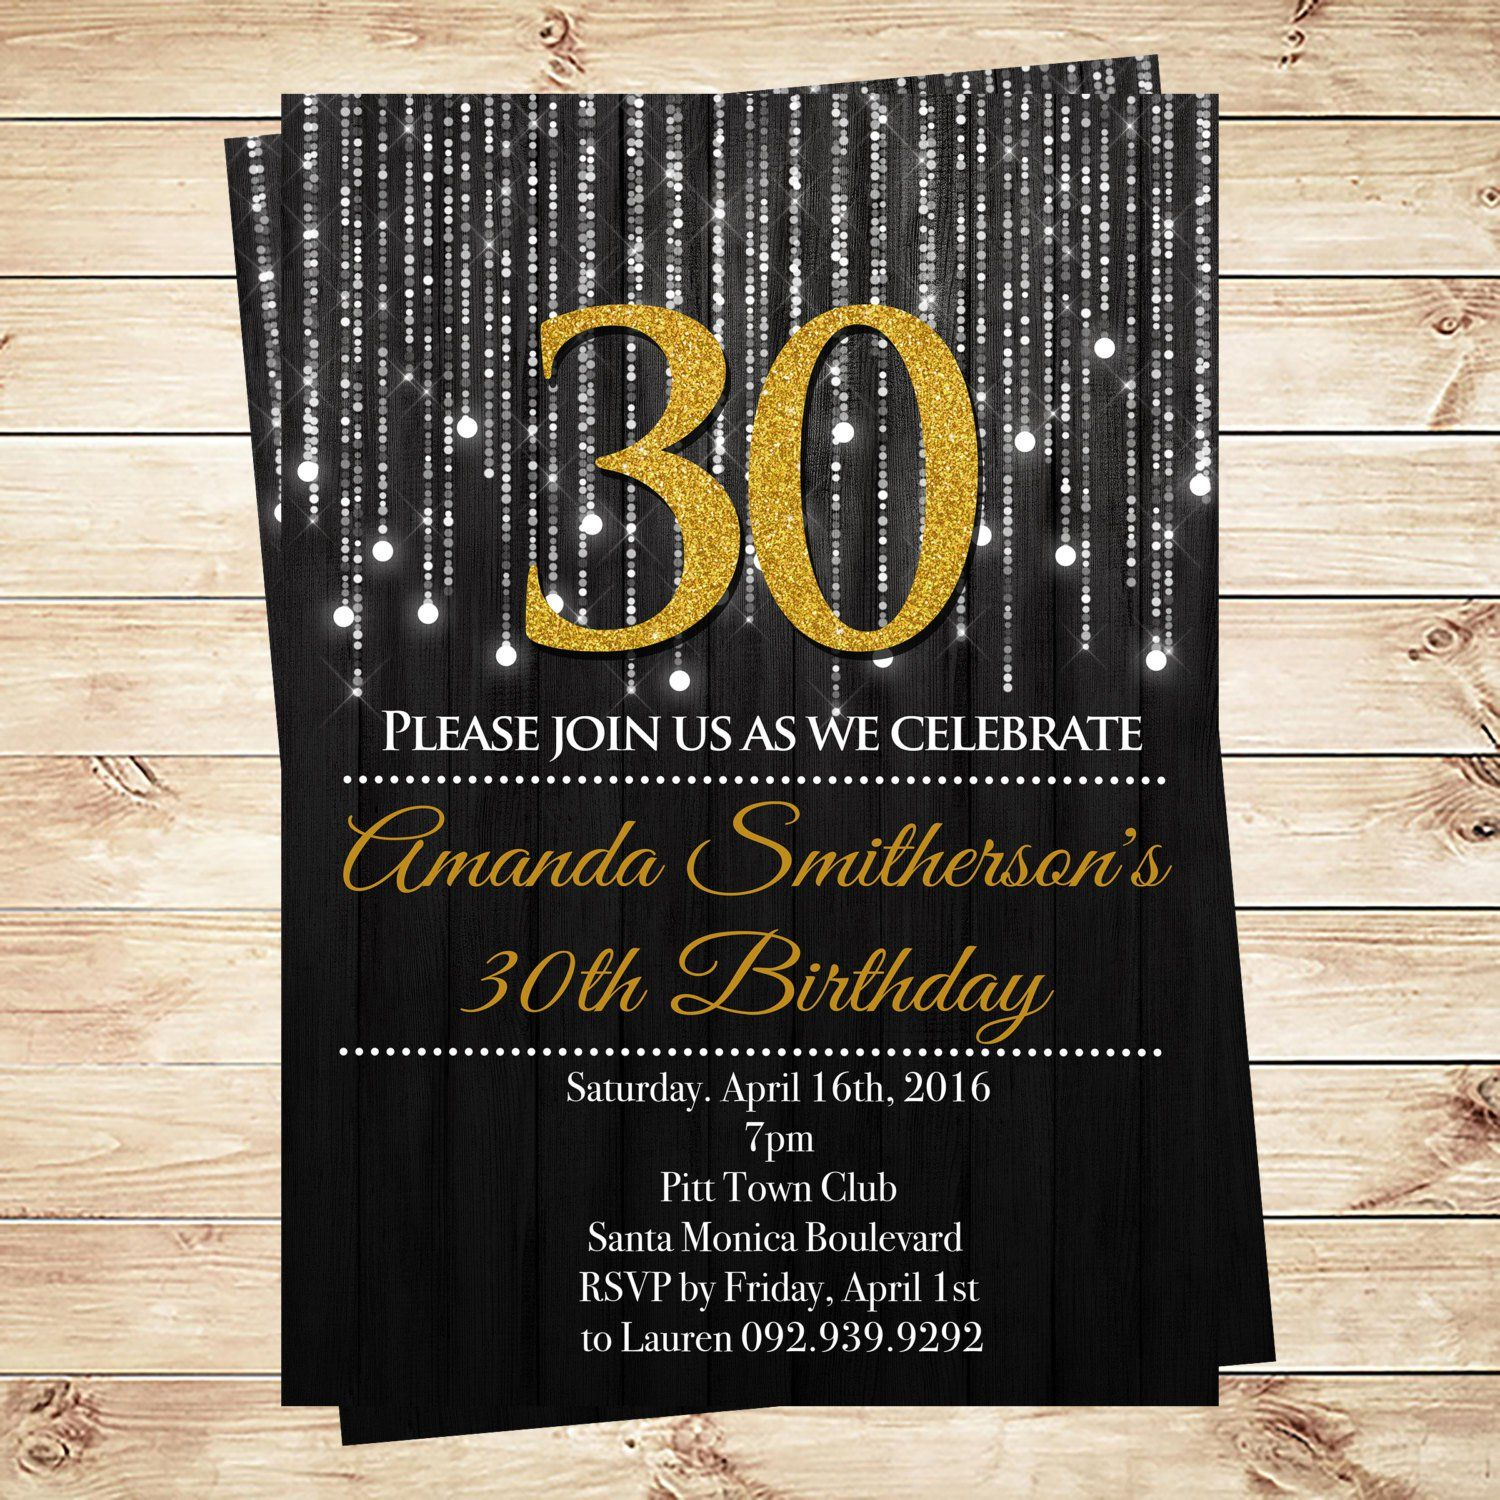 the-25-best-ideas-for-30th-birthday-invitations-for-her-home-family